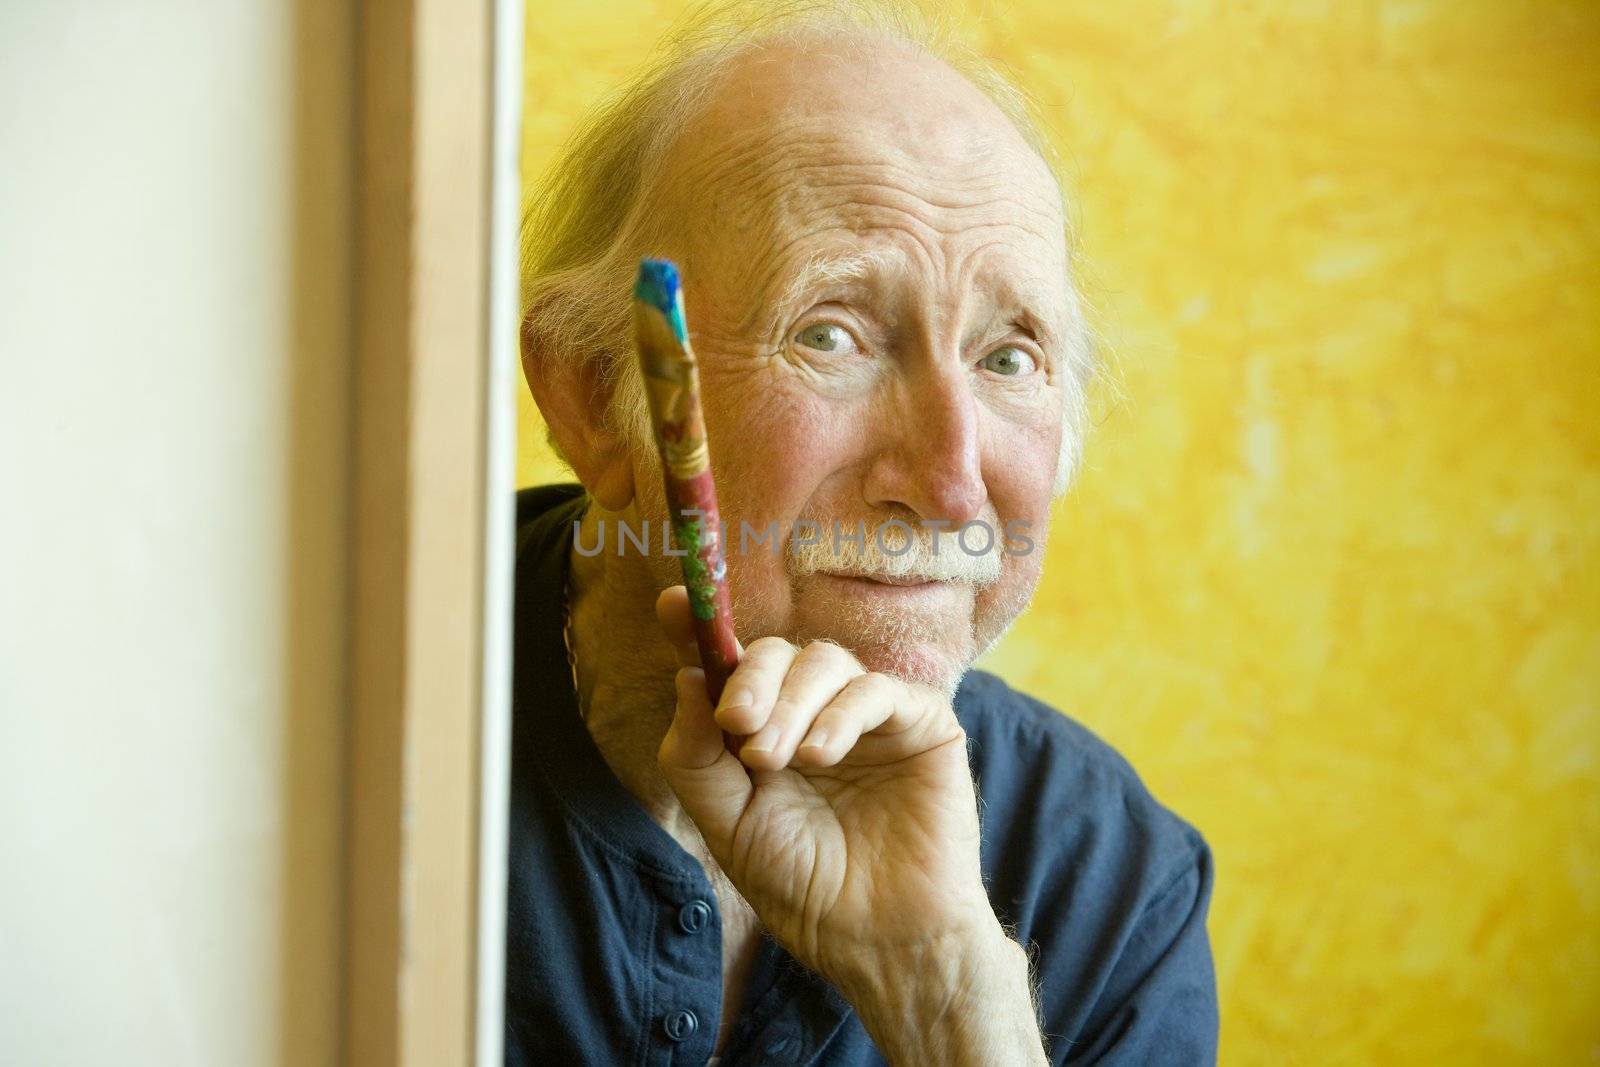 Elderly painter working on a large canvas